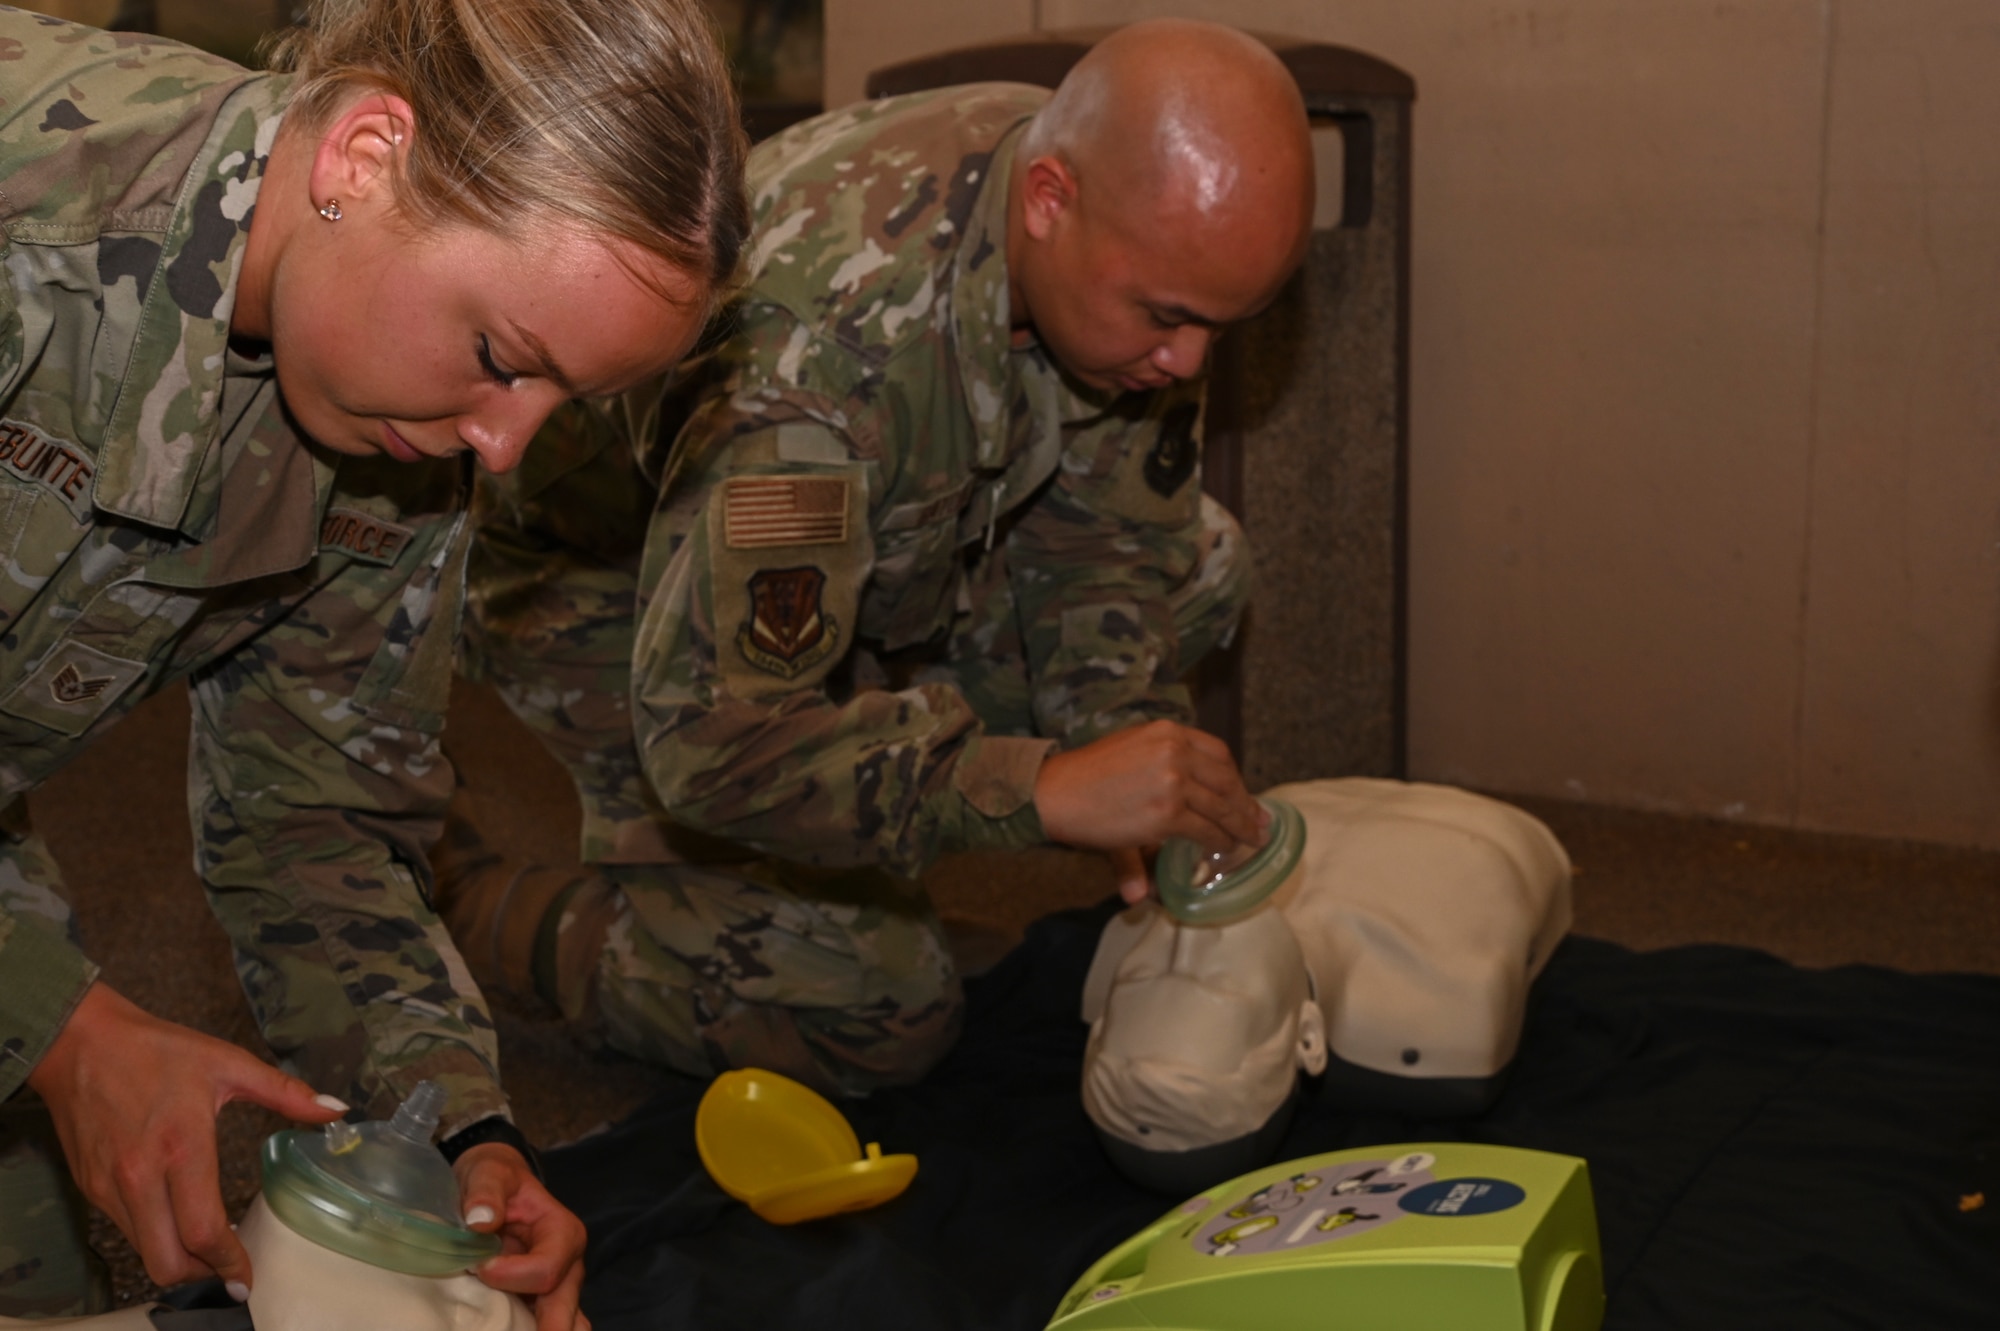 A woman and a man in OCP uniform practice CPR on training mannequins.